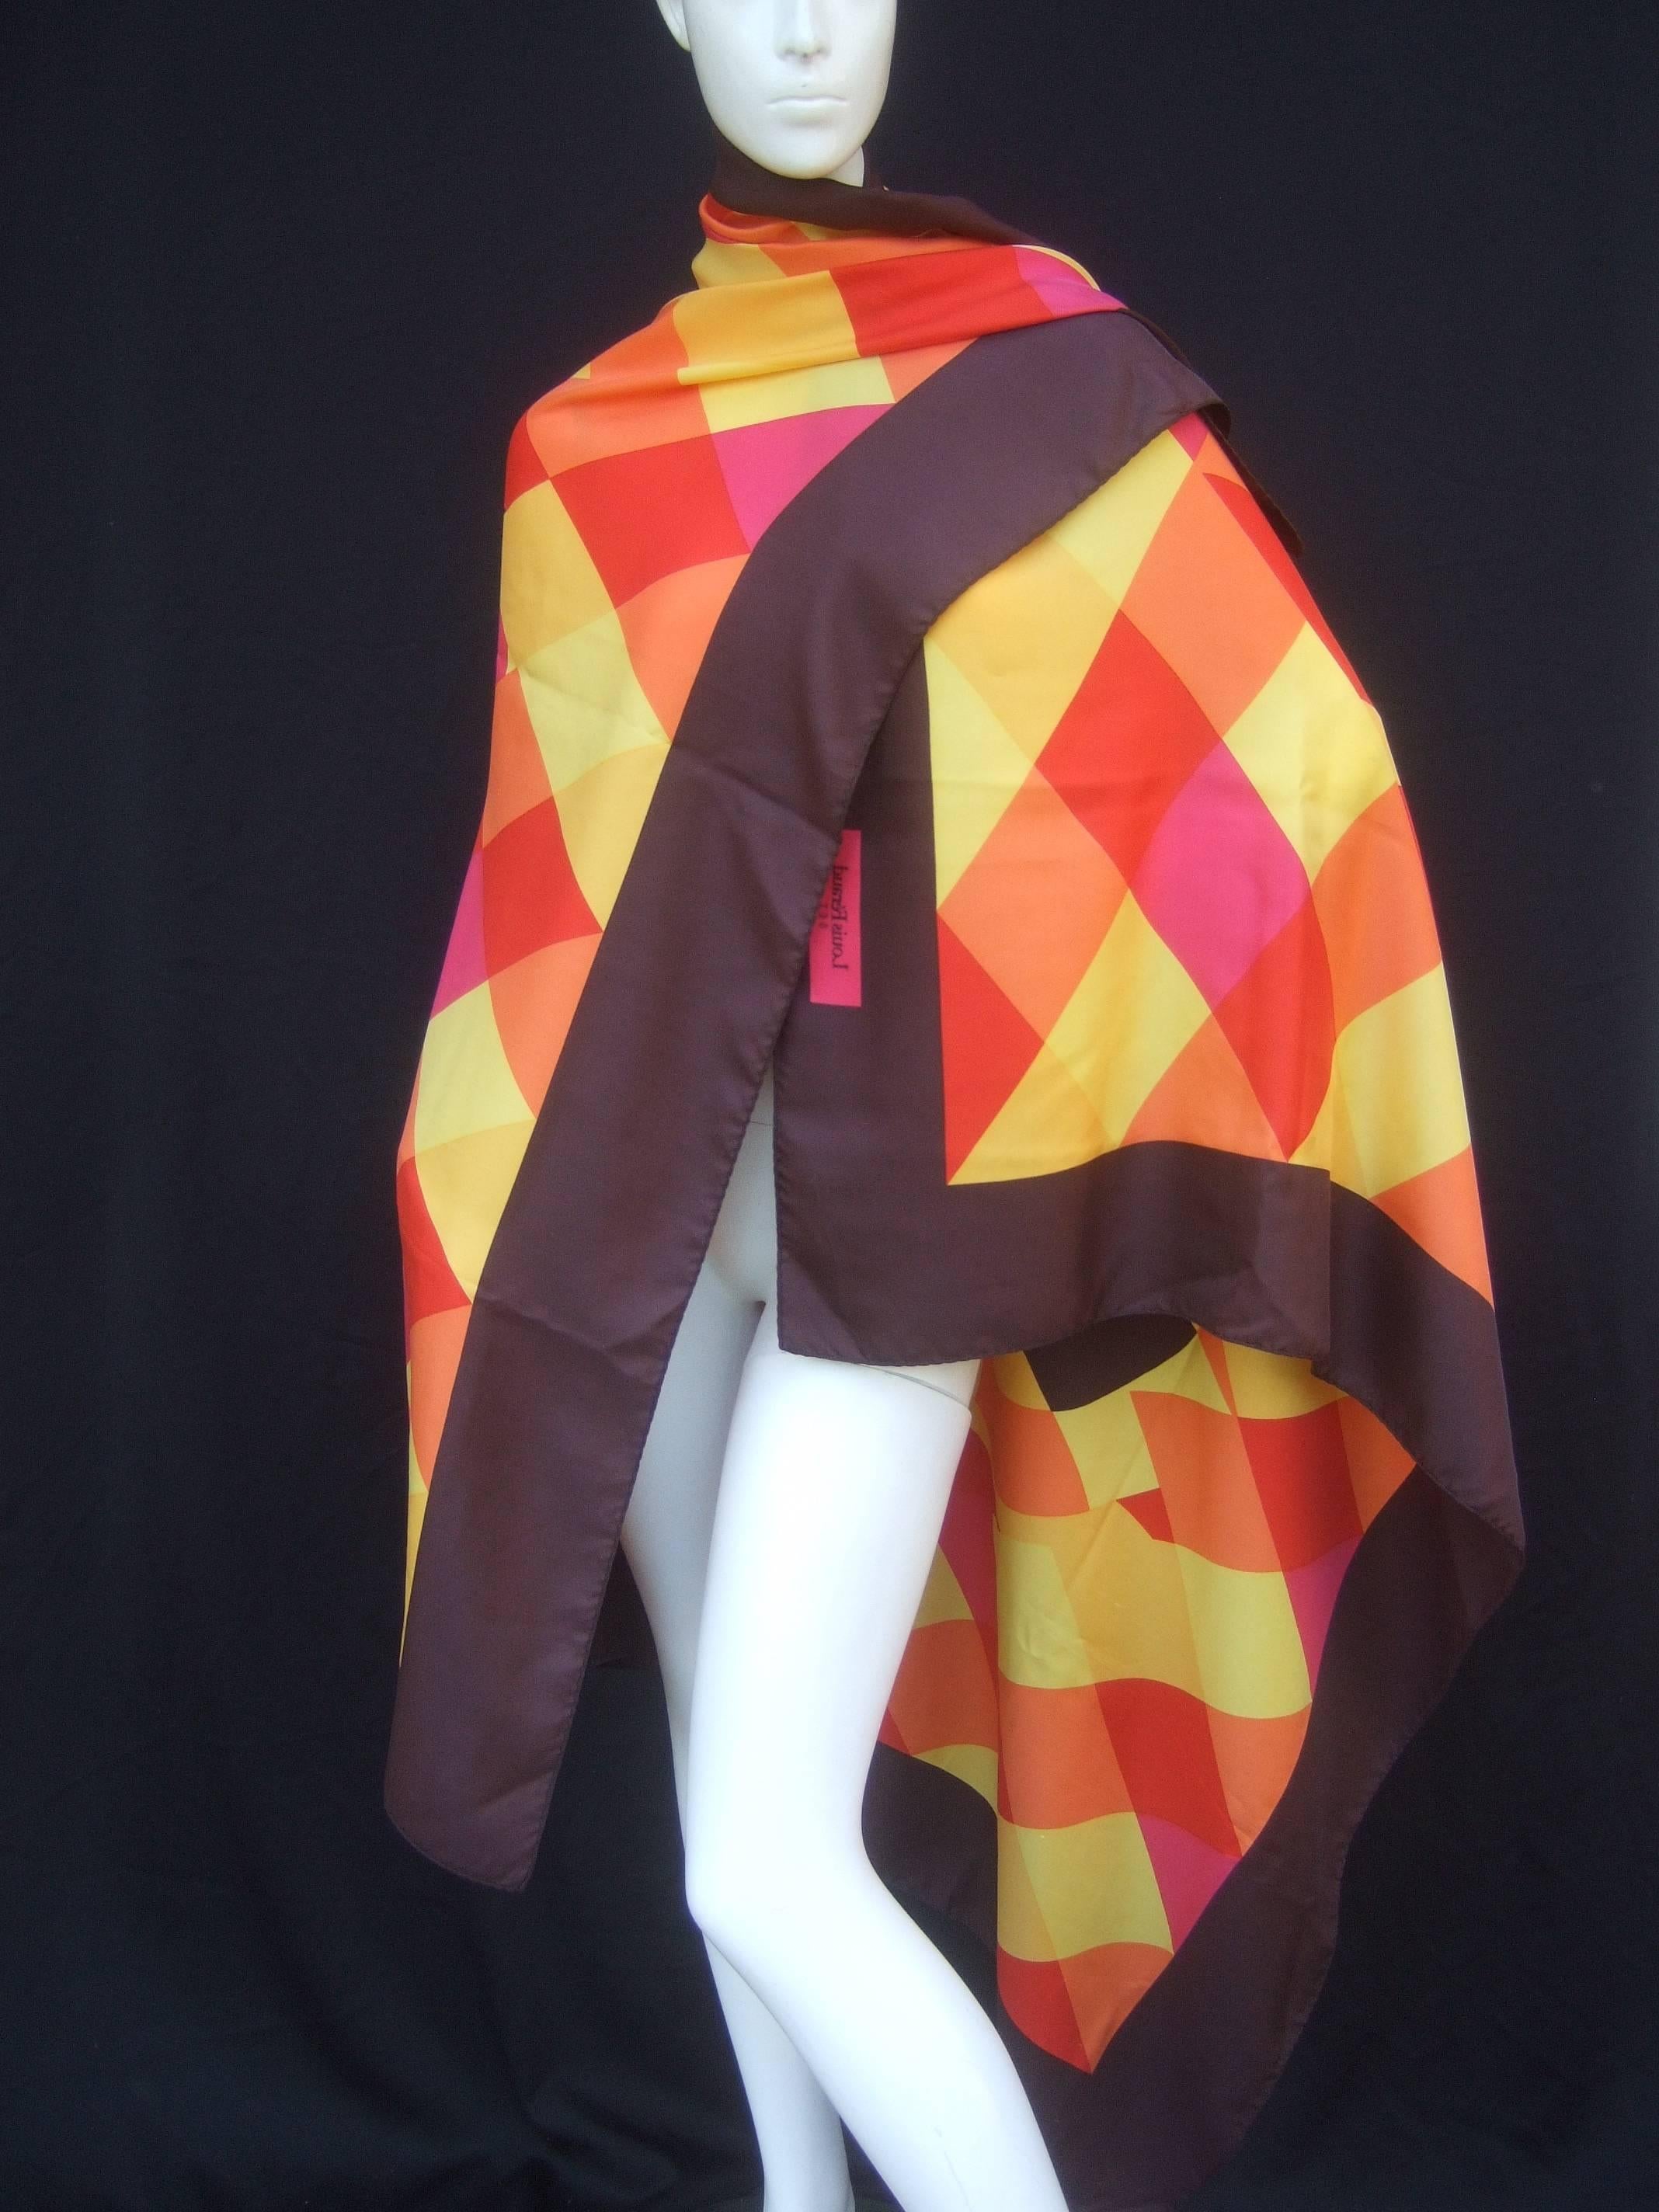 Louis Feraud Massive silk print shawl / scarf 
The large scale shawl / scarf is a collage 
of bold triangular graphics in bright primary
colors

The center is contrasted with circles and curved
designs. The wide border that frames the